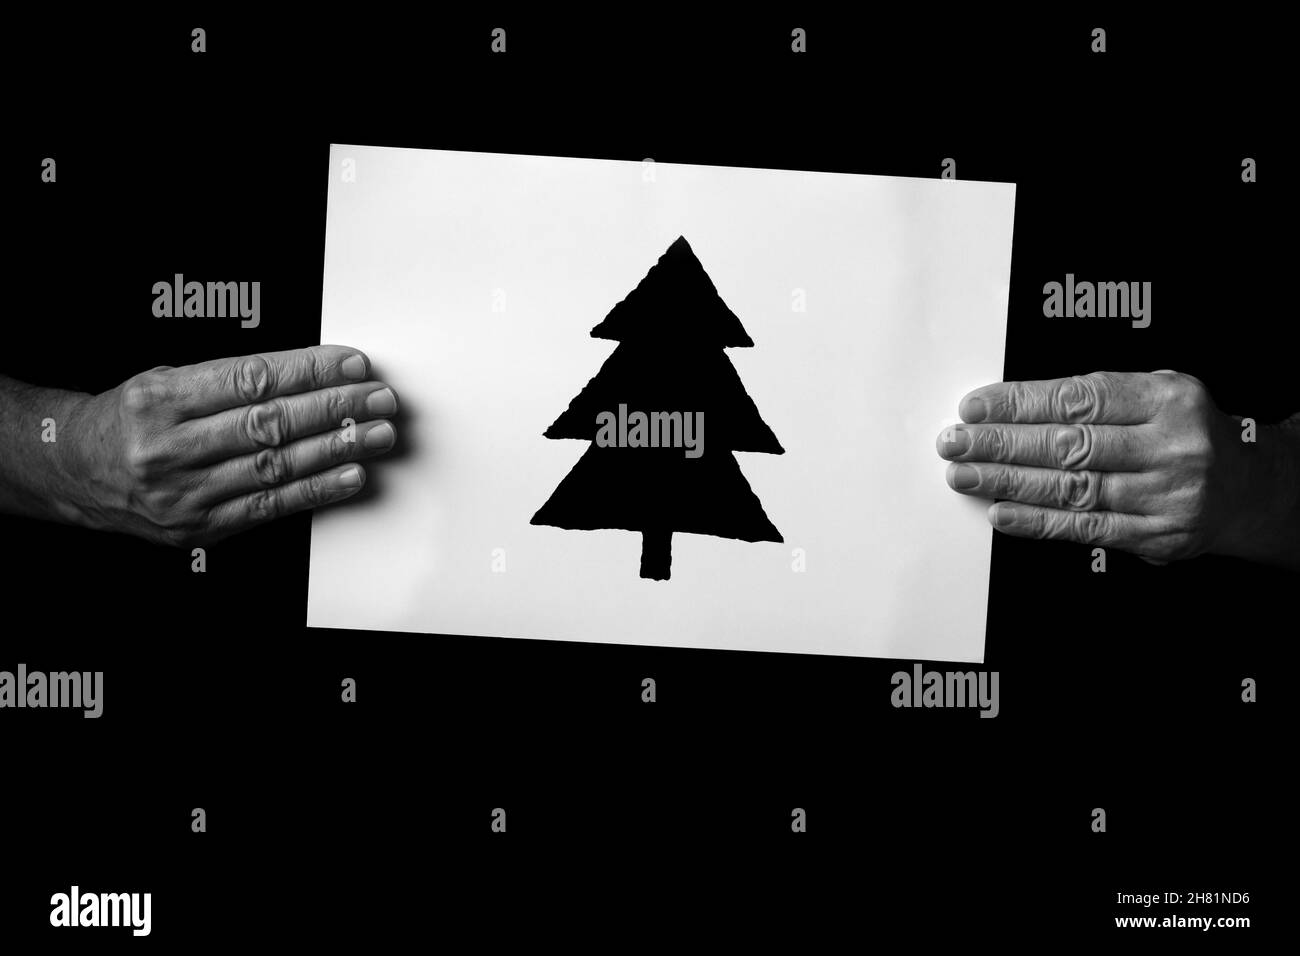 B+W image of male hands holding sheet of paper with christmas tree symbol against black background. Stock Photo